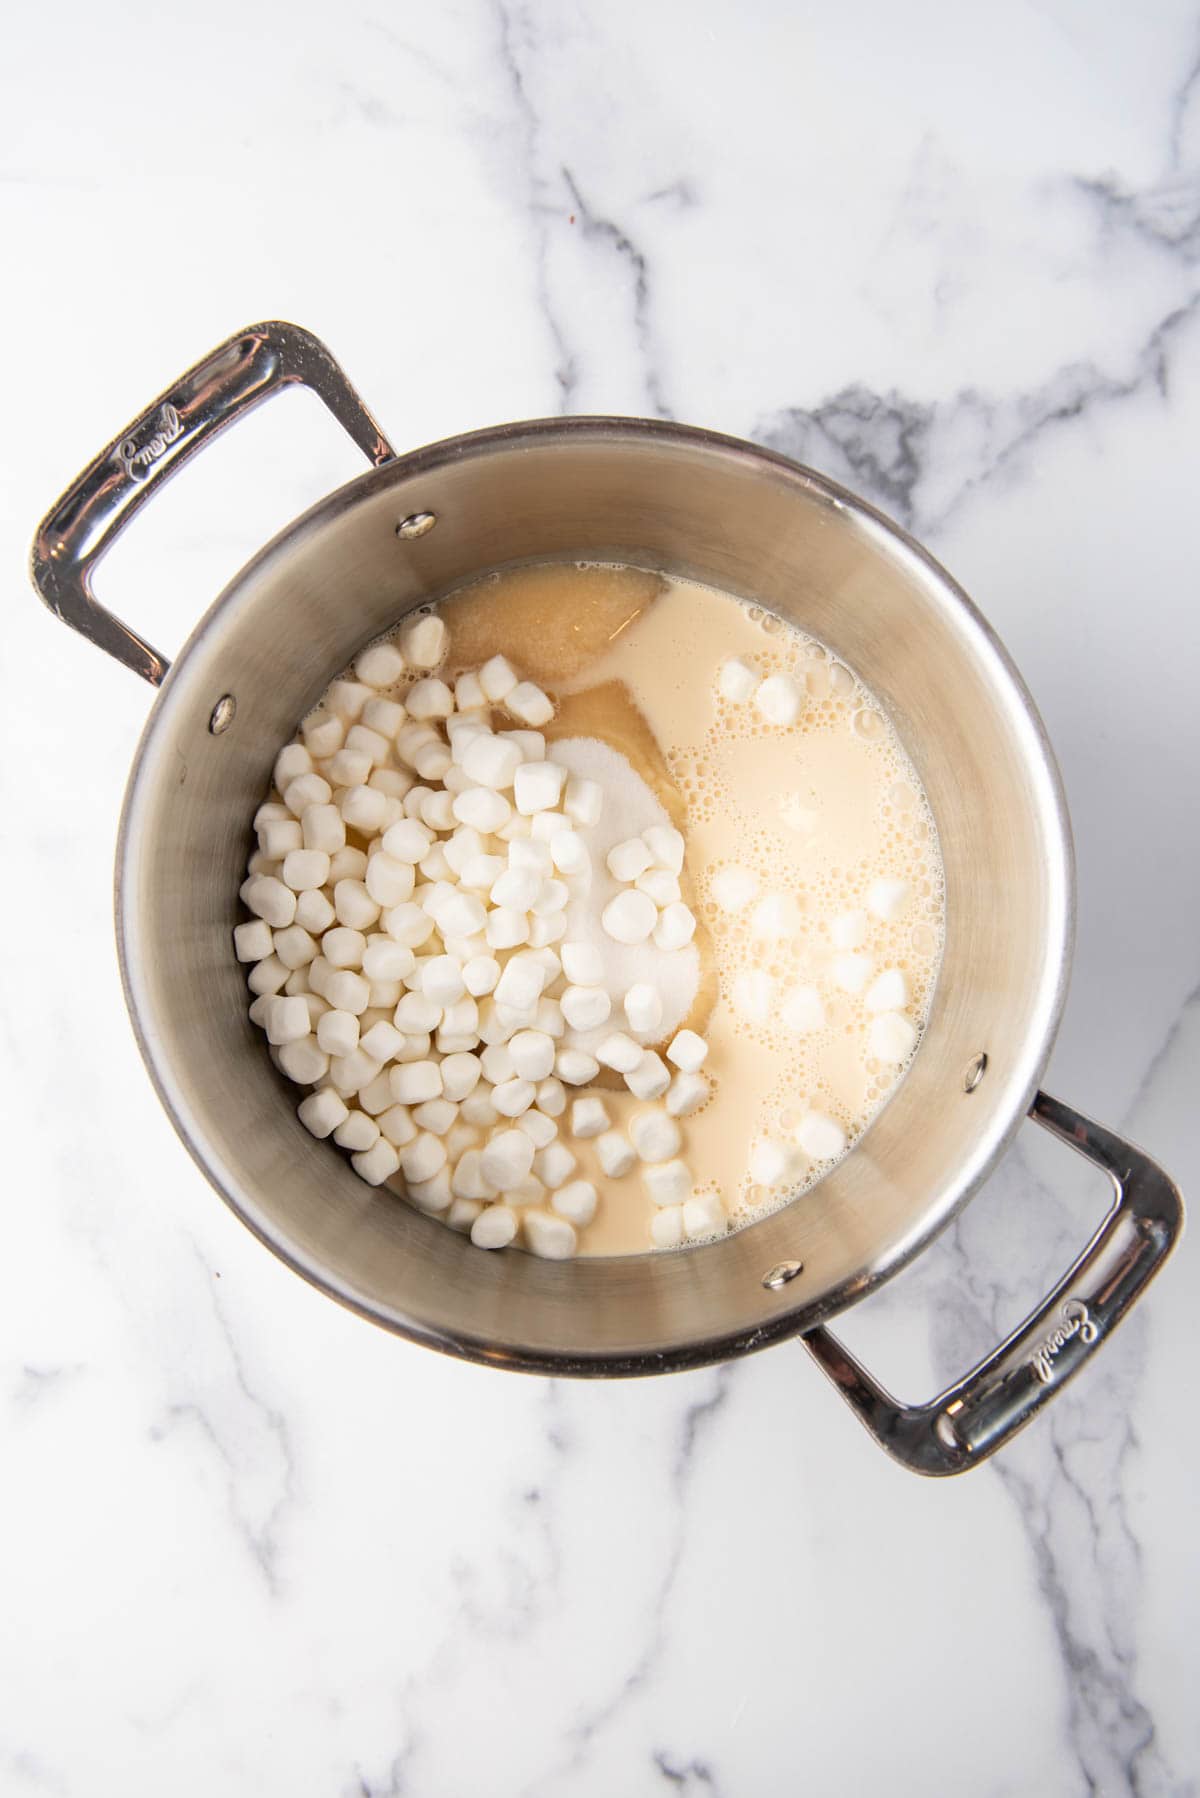 Sugar, evaporated milk, and marshmallows in a large pot.